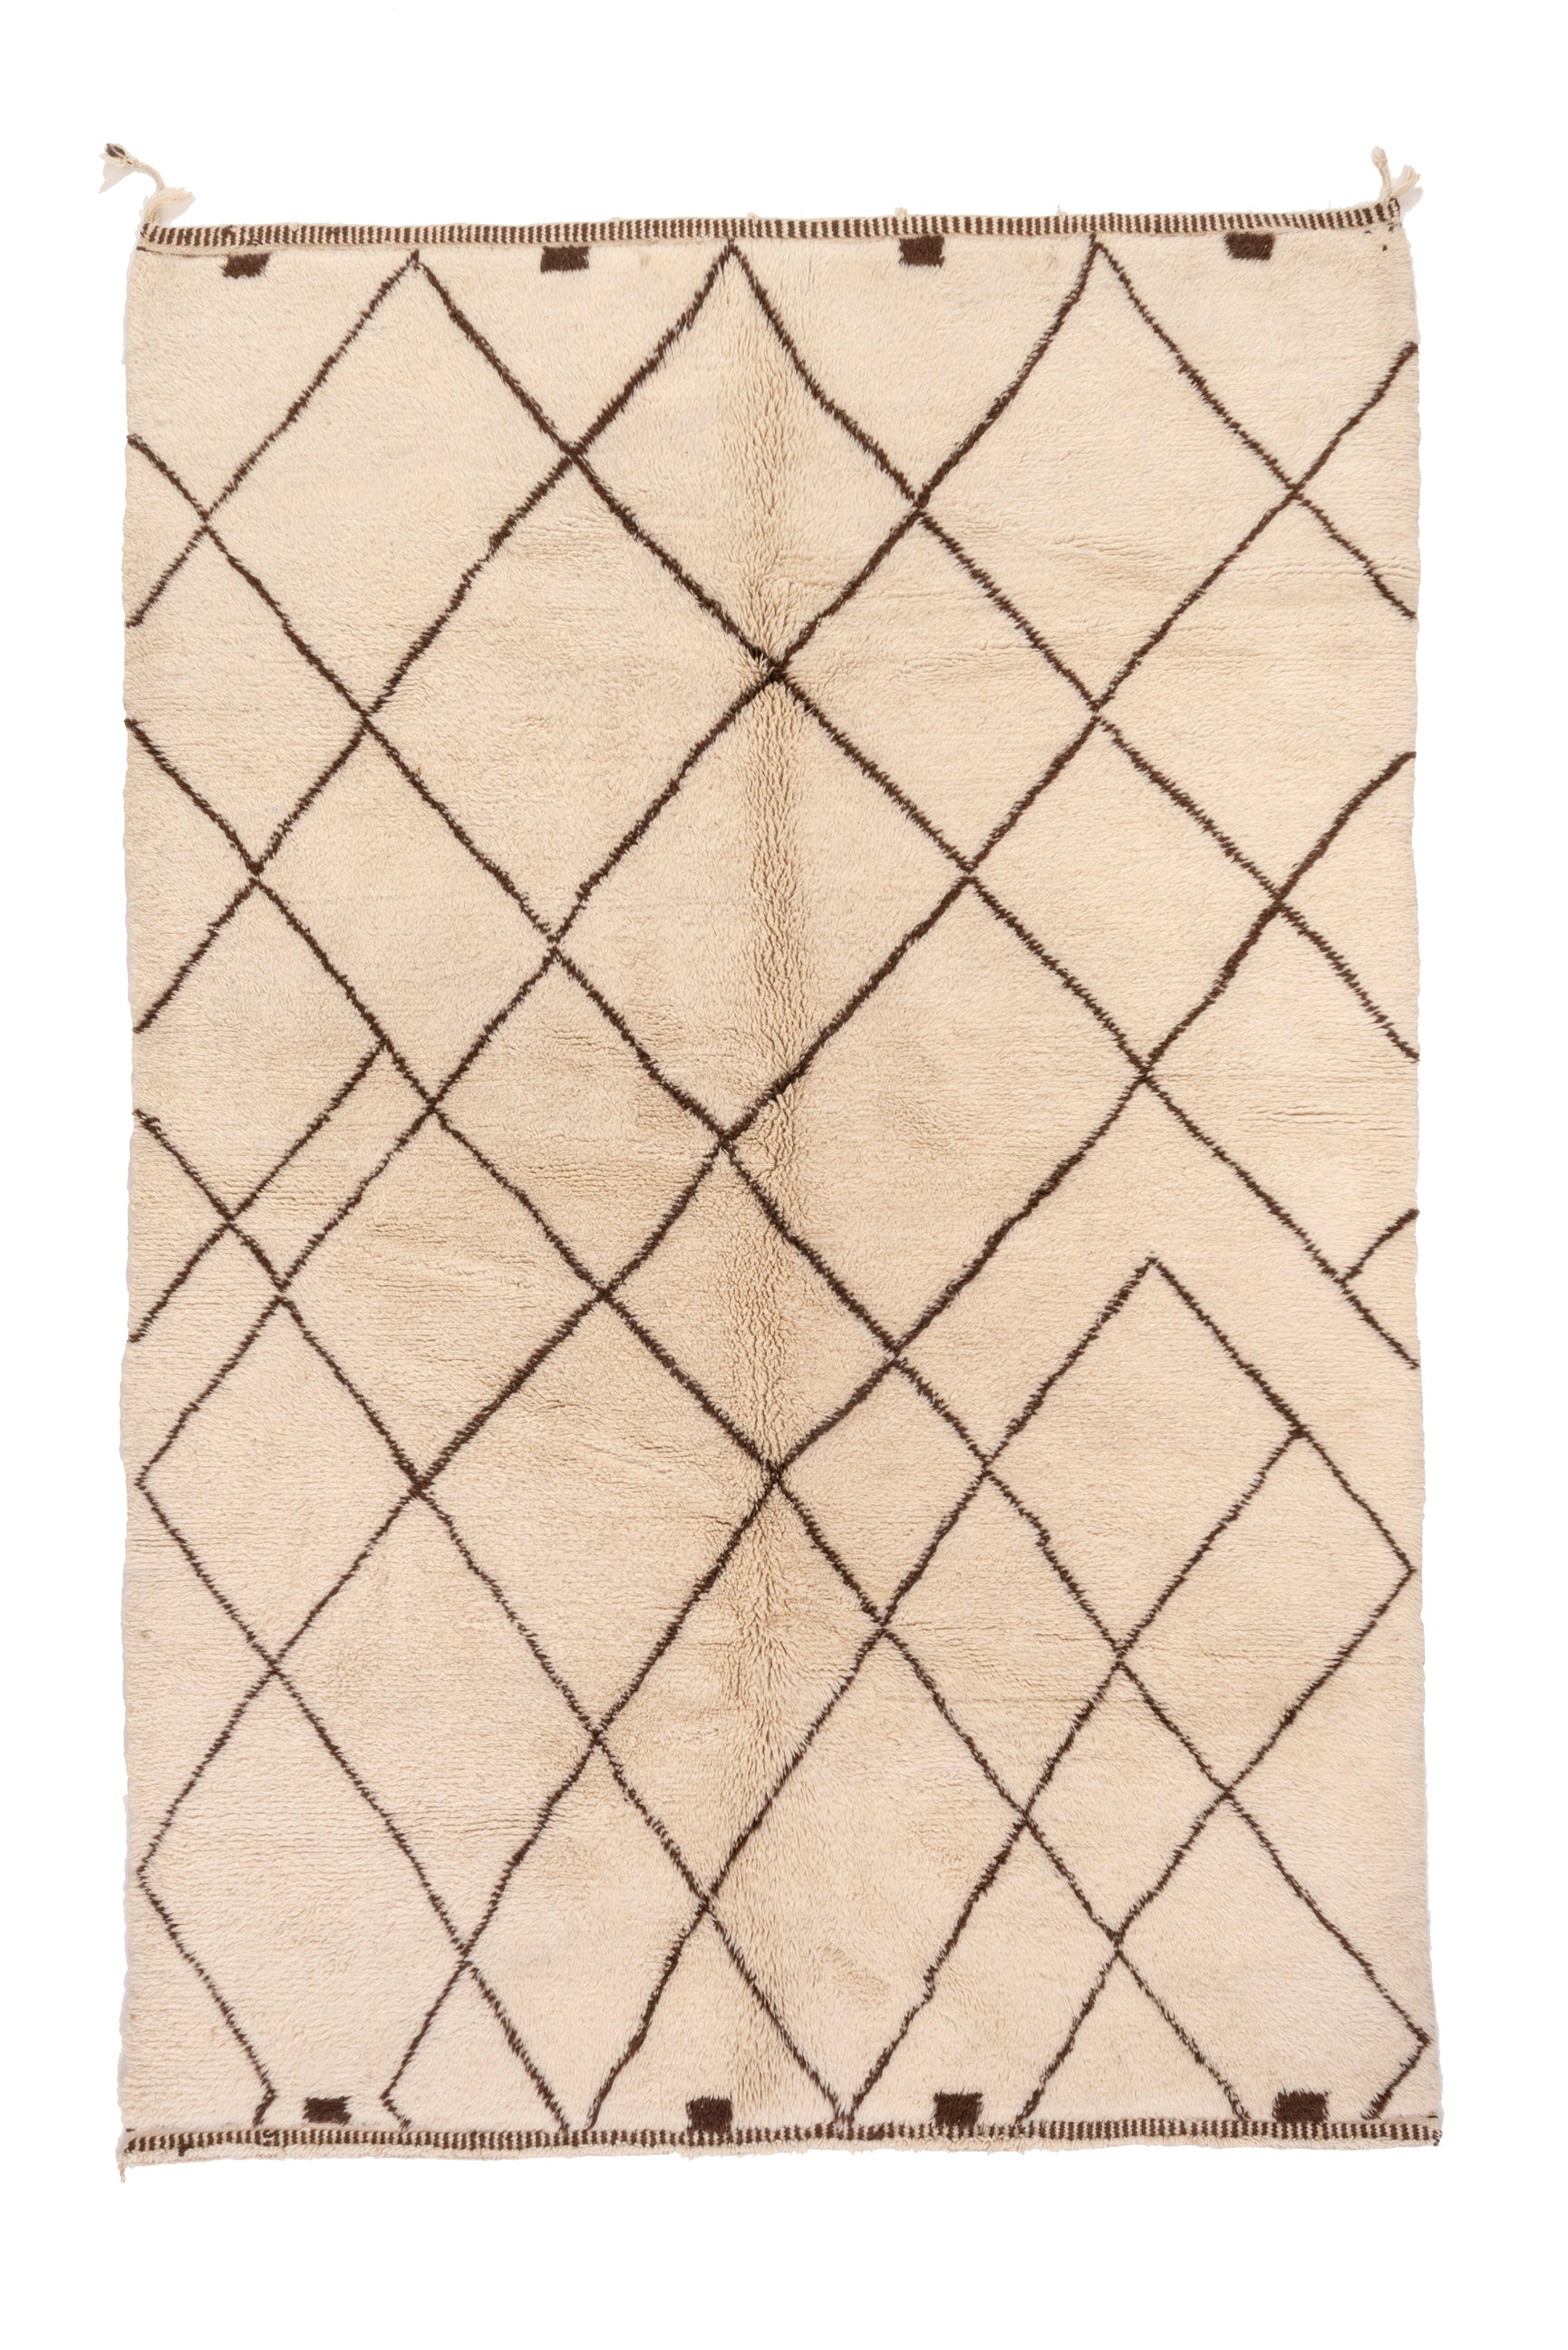 Elevate your space with our Ivory Crosshatch Beni Ourain Rug, featuring a classic ivory base with intricate crisscross brown lines meticulously handwoven in wool. Perfect for adding a touch of timeless elegance to your decor.